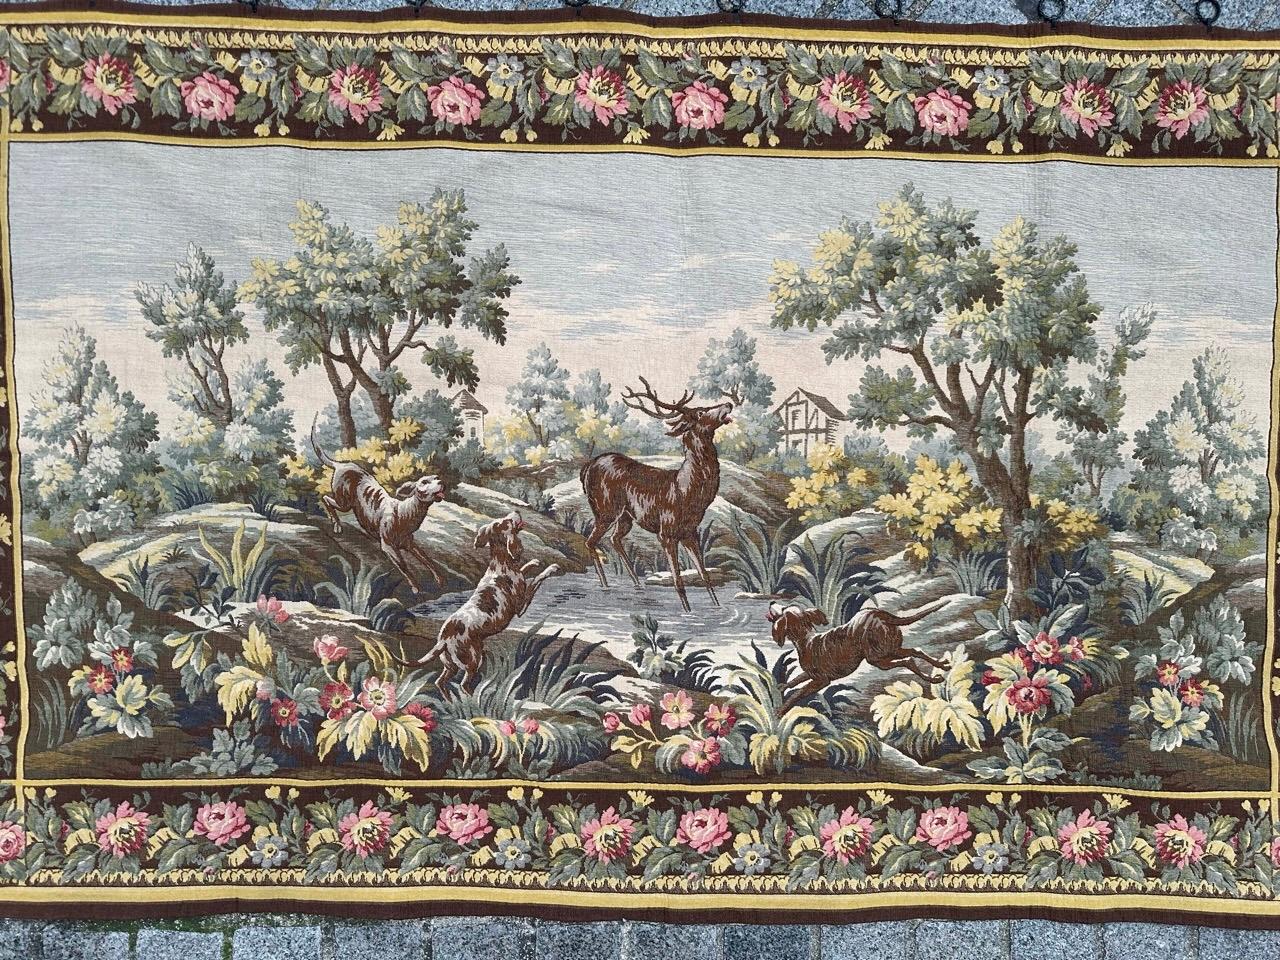 Pretty vintage French jacquard tapestry, woven in jacquard looms in Aubusson style tapestries, with a beautiful design of deer hunting, showing hunting dogs surrounding a deer, taking refuge in a small pond in the woods.

✨✨✨
